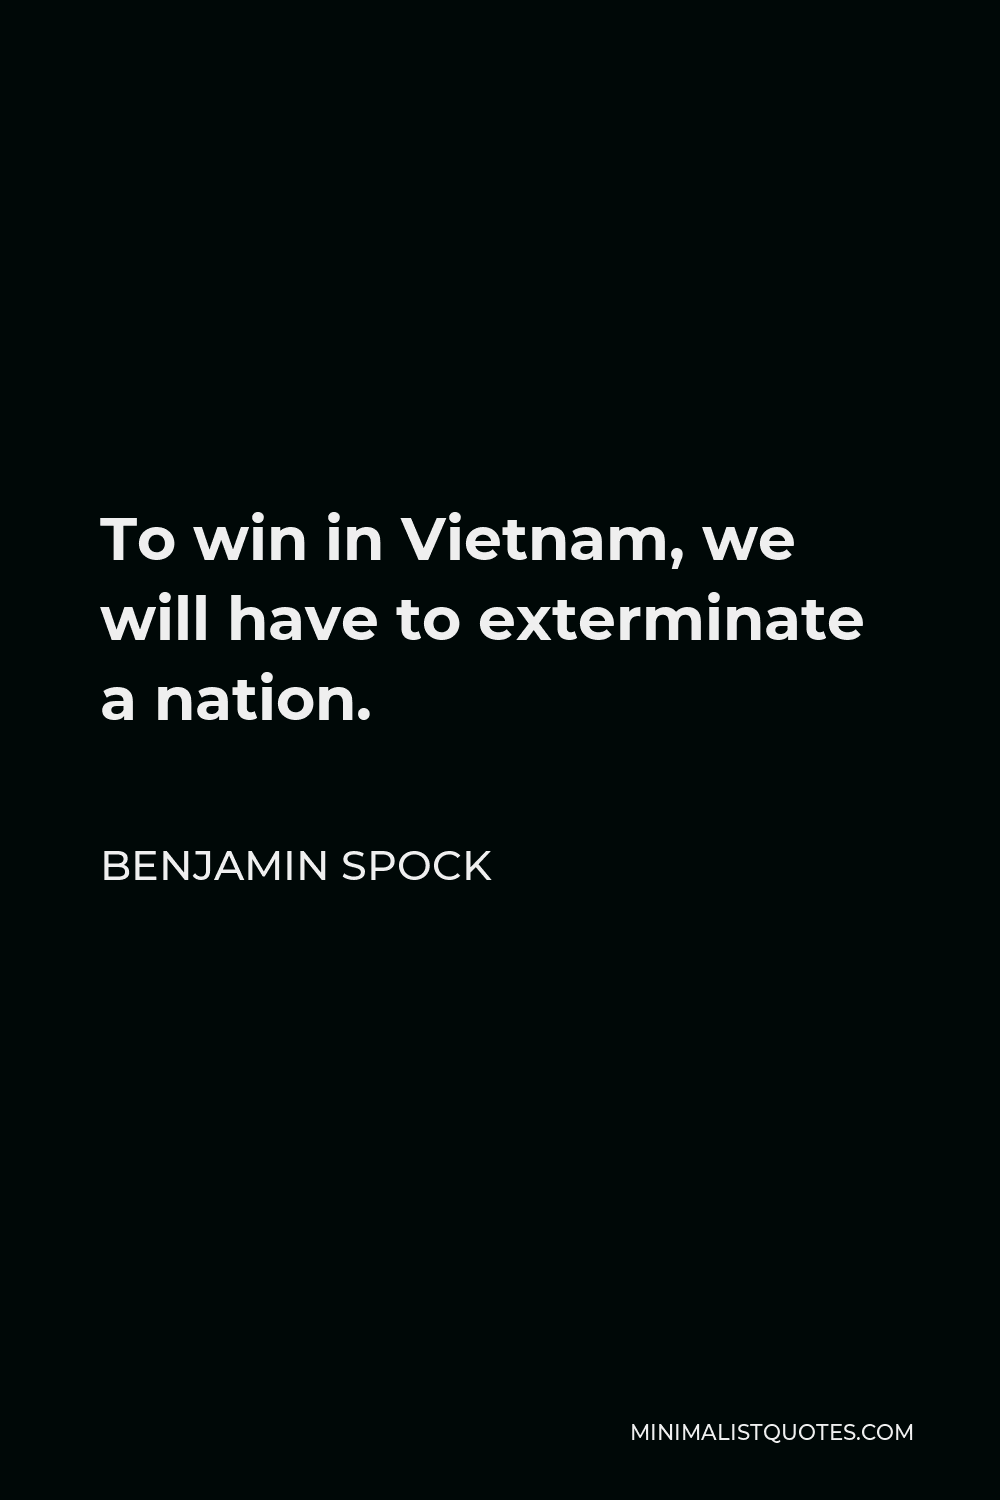 Benjamin Spock Quote - To win in Vietnam, we will have to exterminate a nation.